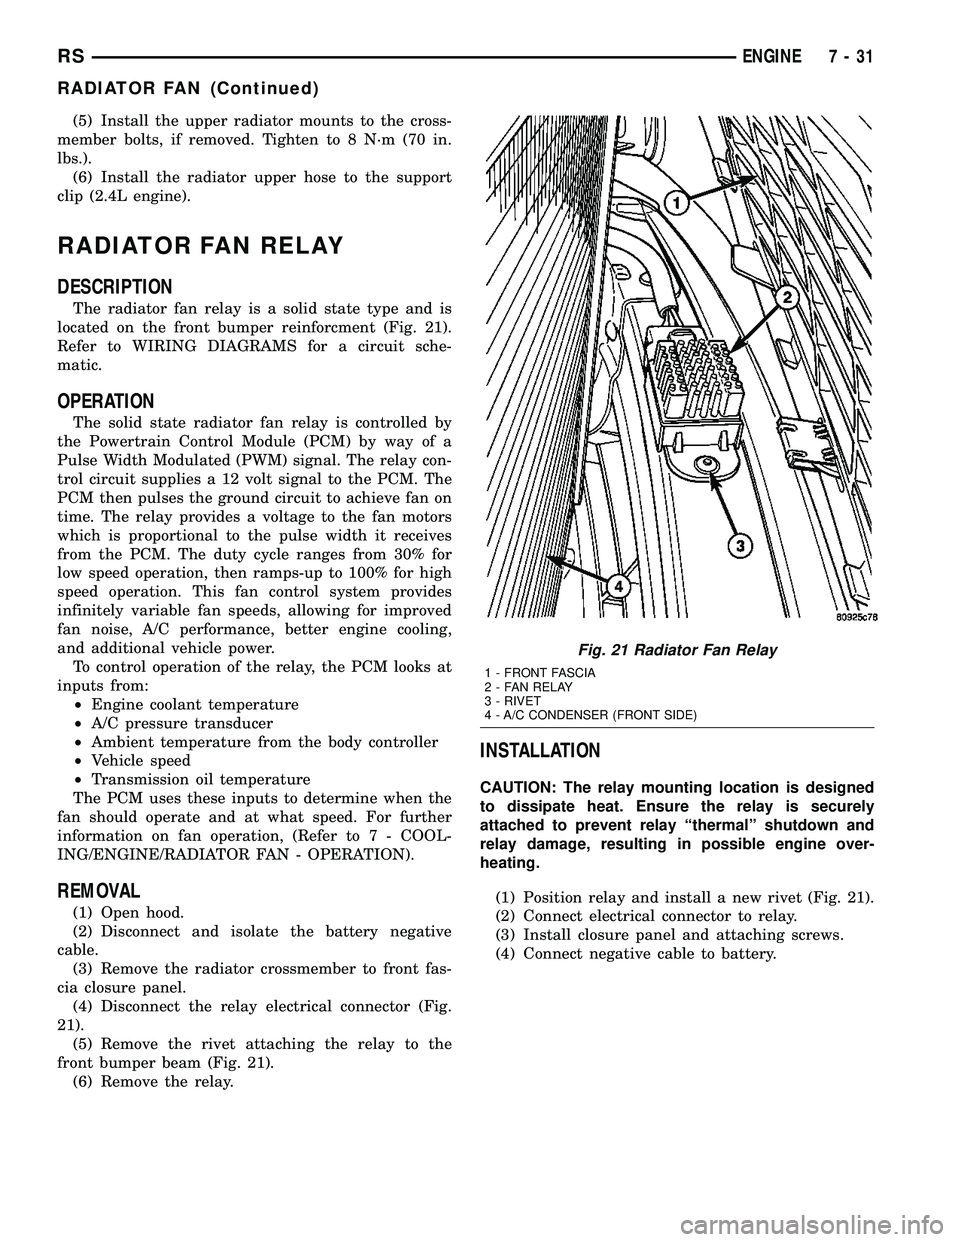 CHRYSLER VOYAGER 2005  Service Manual (5) Install the upper radiator mounts to the cross-
member bolts, if removed. Tighten to 8 N´m (70 in.
lbs.).
(6) Install the radiator upper hose to the support
clip (2.4L engine).
RADIATOR FAN RELAY